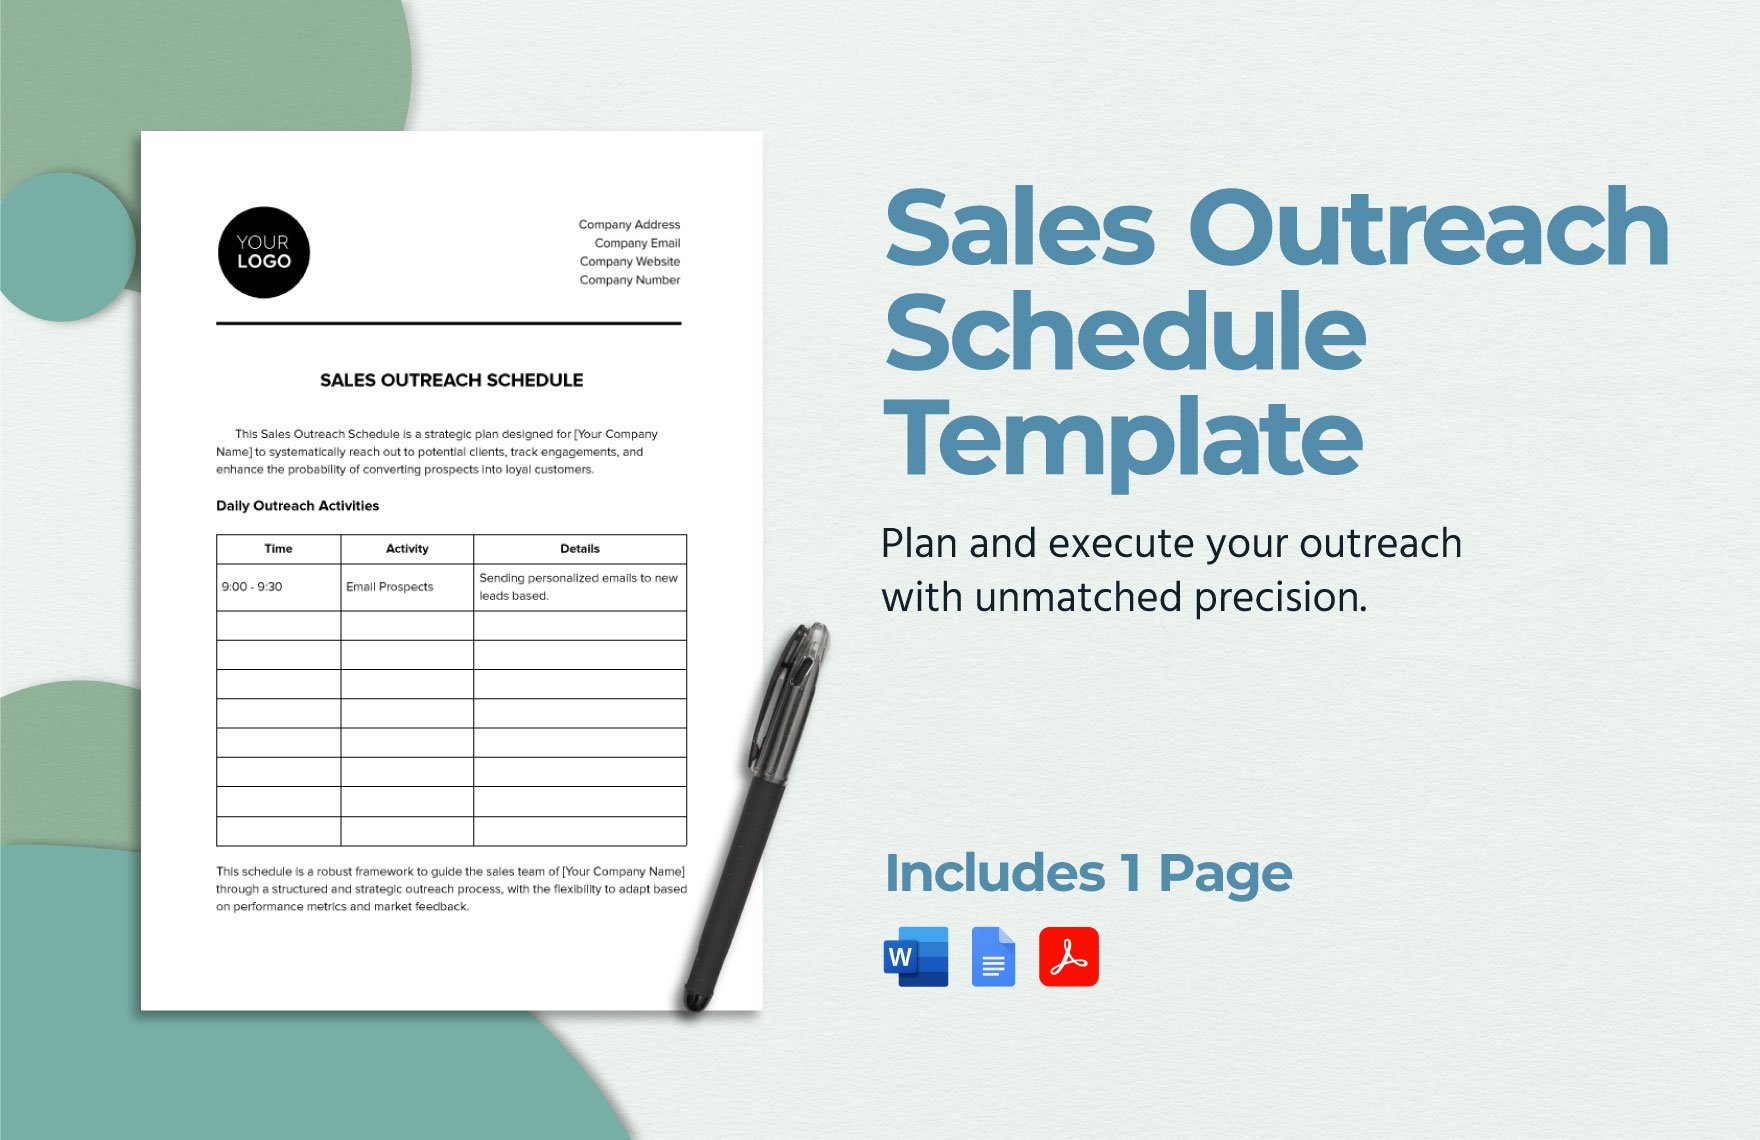 Sales Outreach Schedule Template in Word, Google Docs, PDF